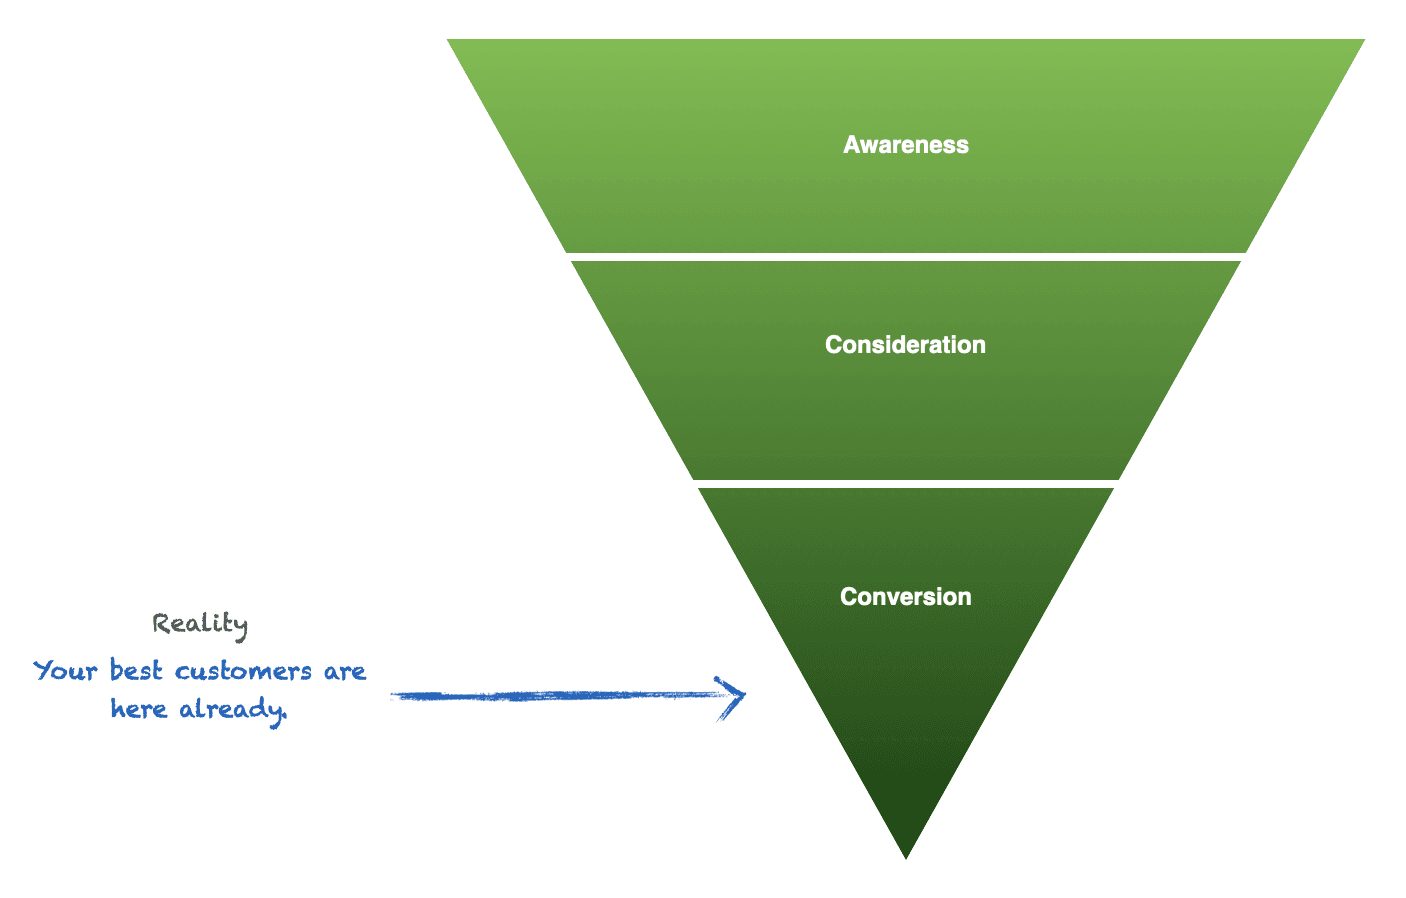 Bottom of Funnel Content Marketing: Your best customers are here already.